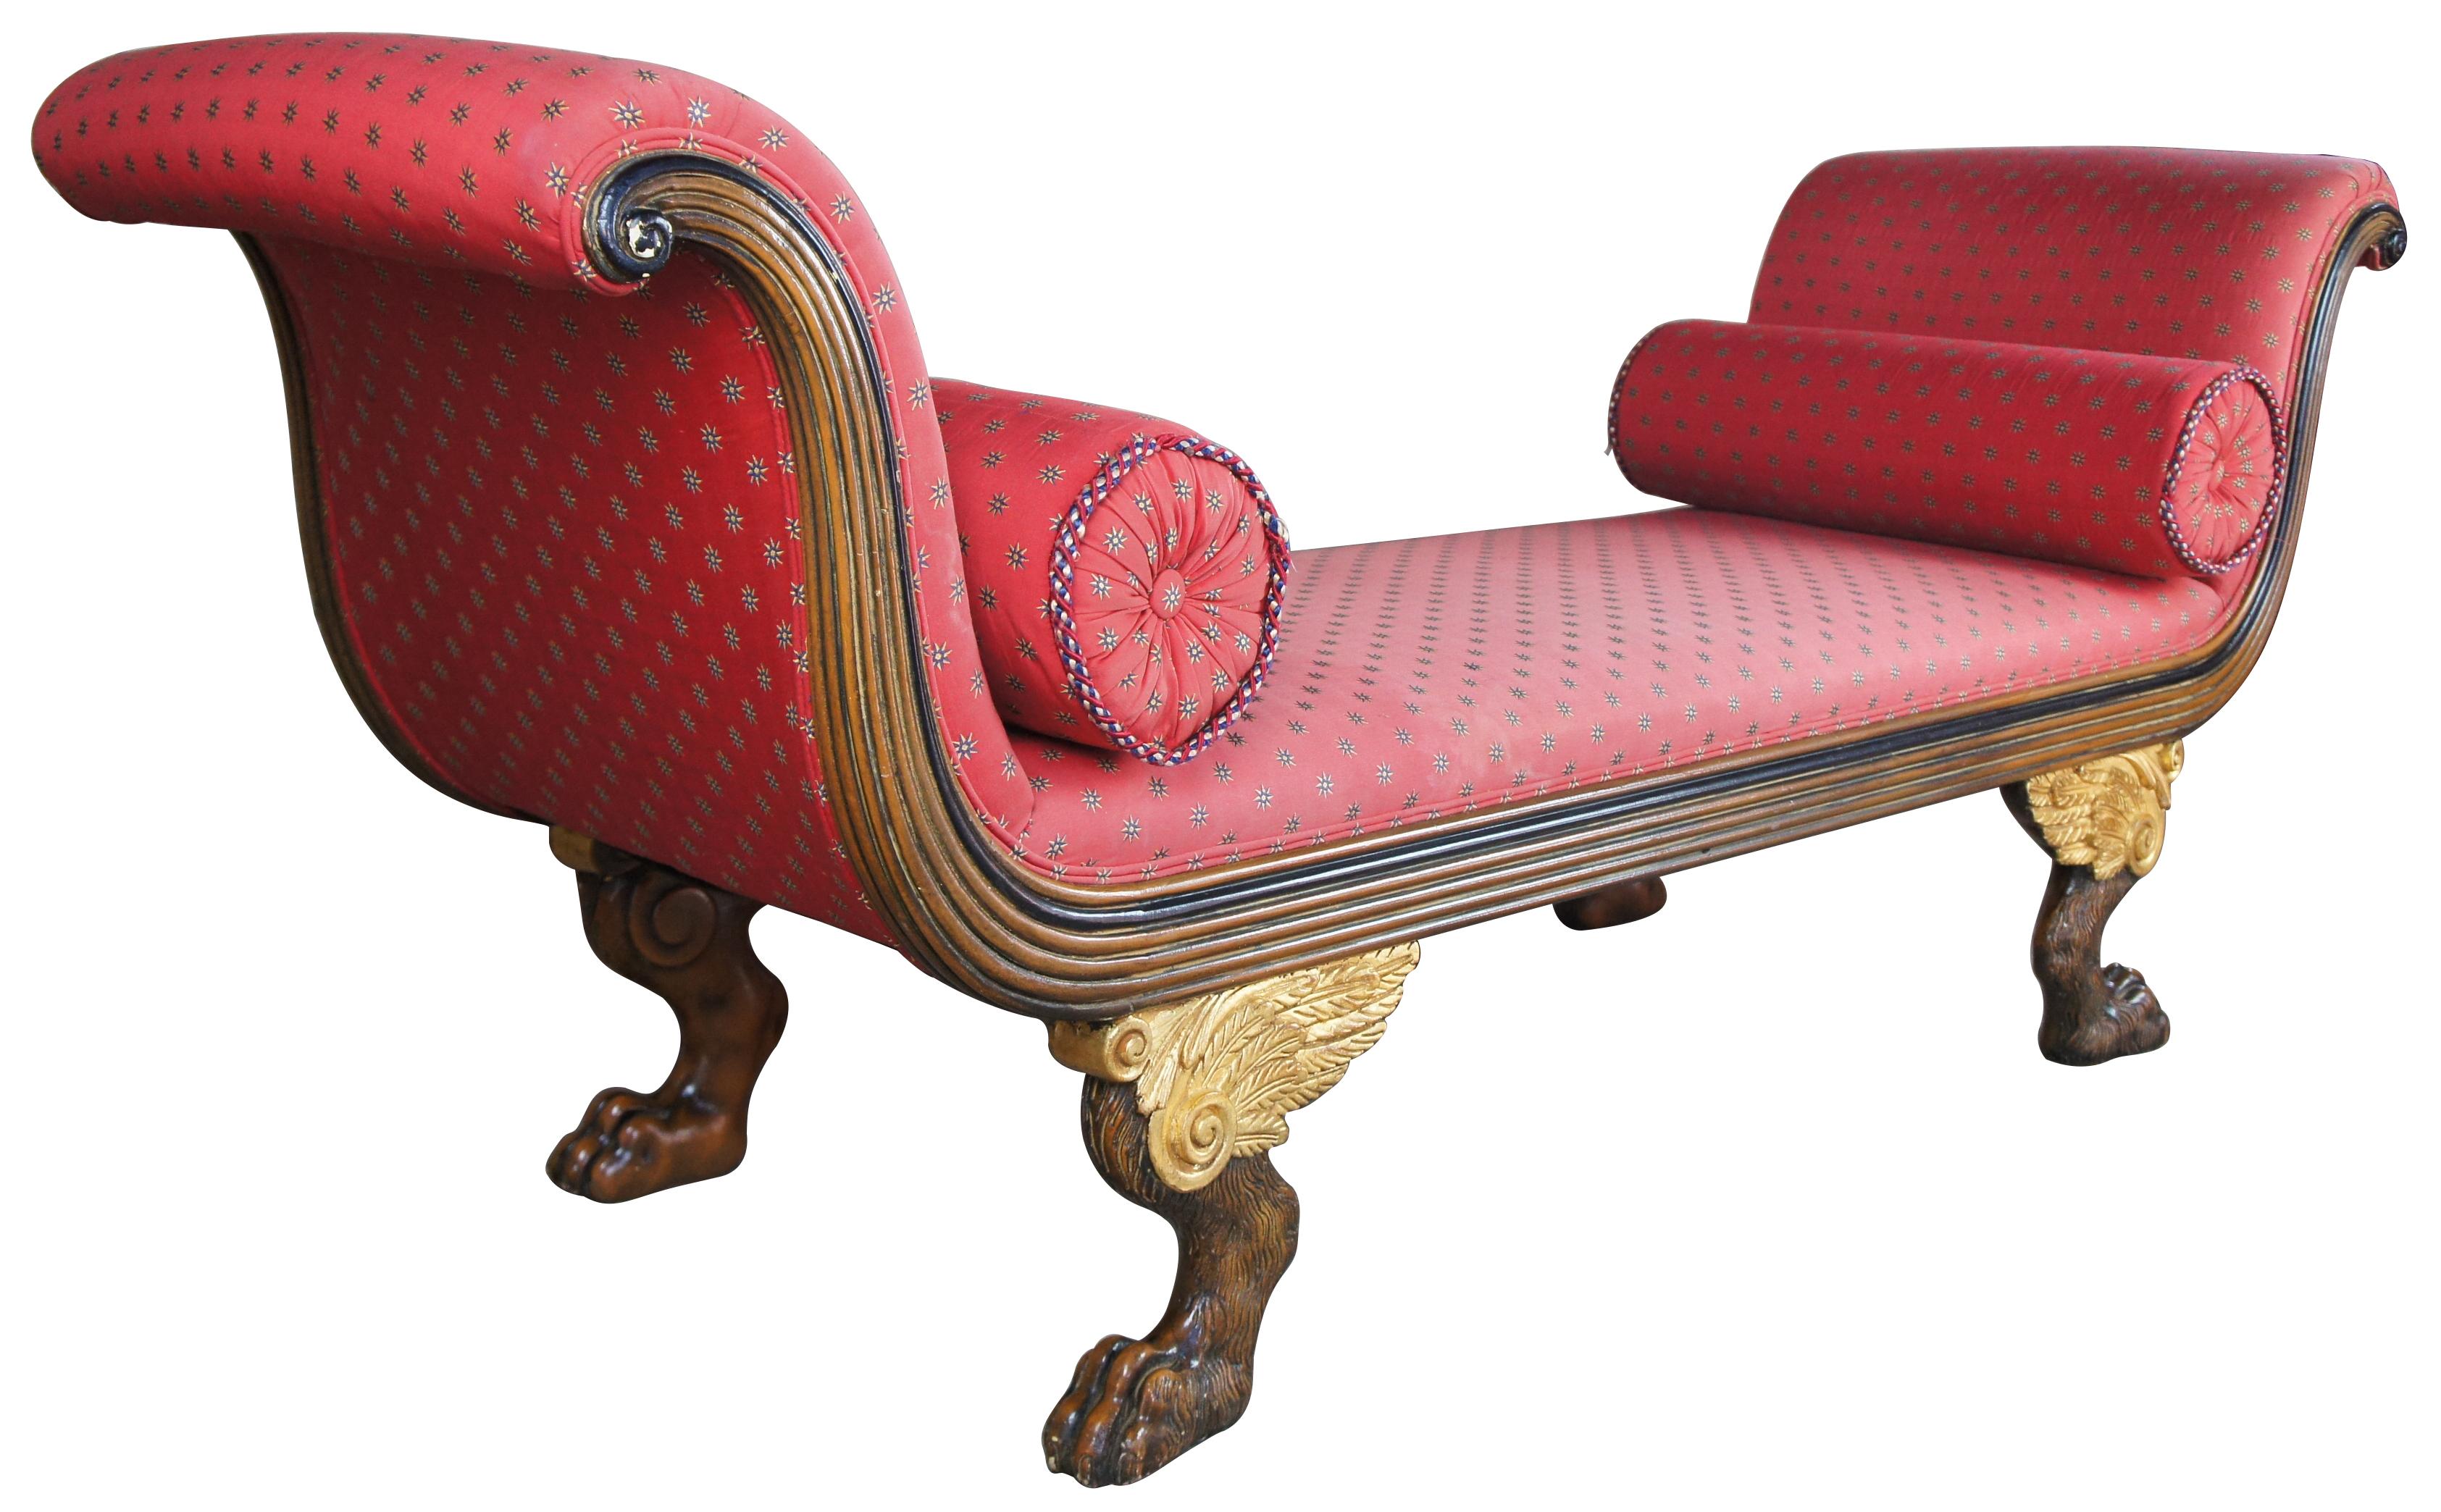 Baker Furniture French Empire style sleigh bench mahogany red loveseat settee

A gorgeous Baker furniture bench that draws inspiration from French Empire and Egyptian Revival. Made from mahogany with sleigh shape and carved winged paw feet.